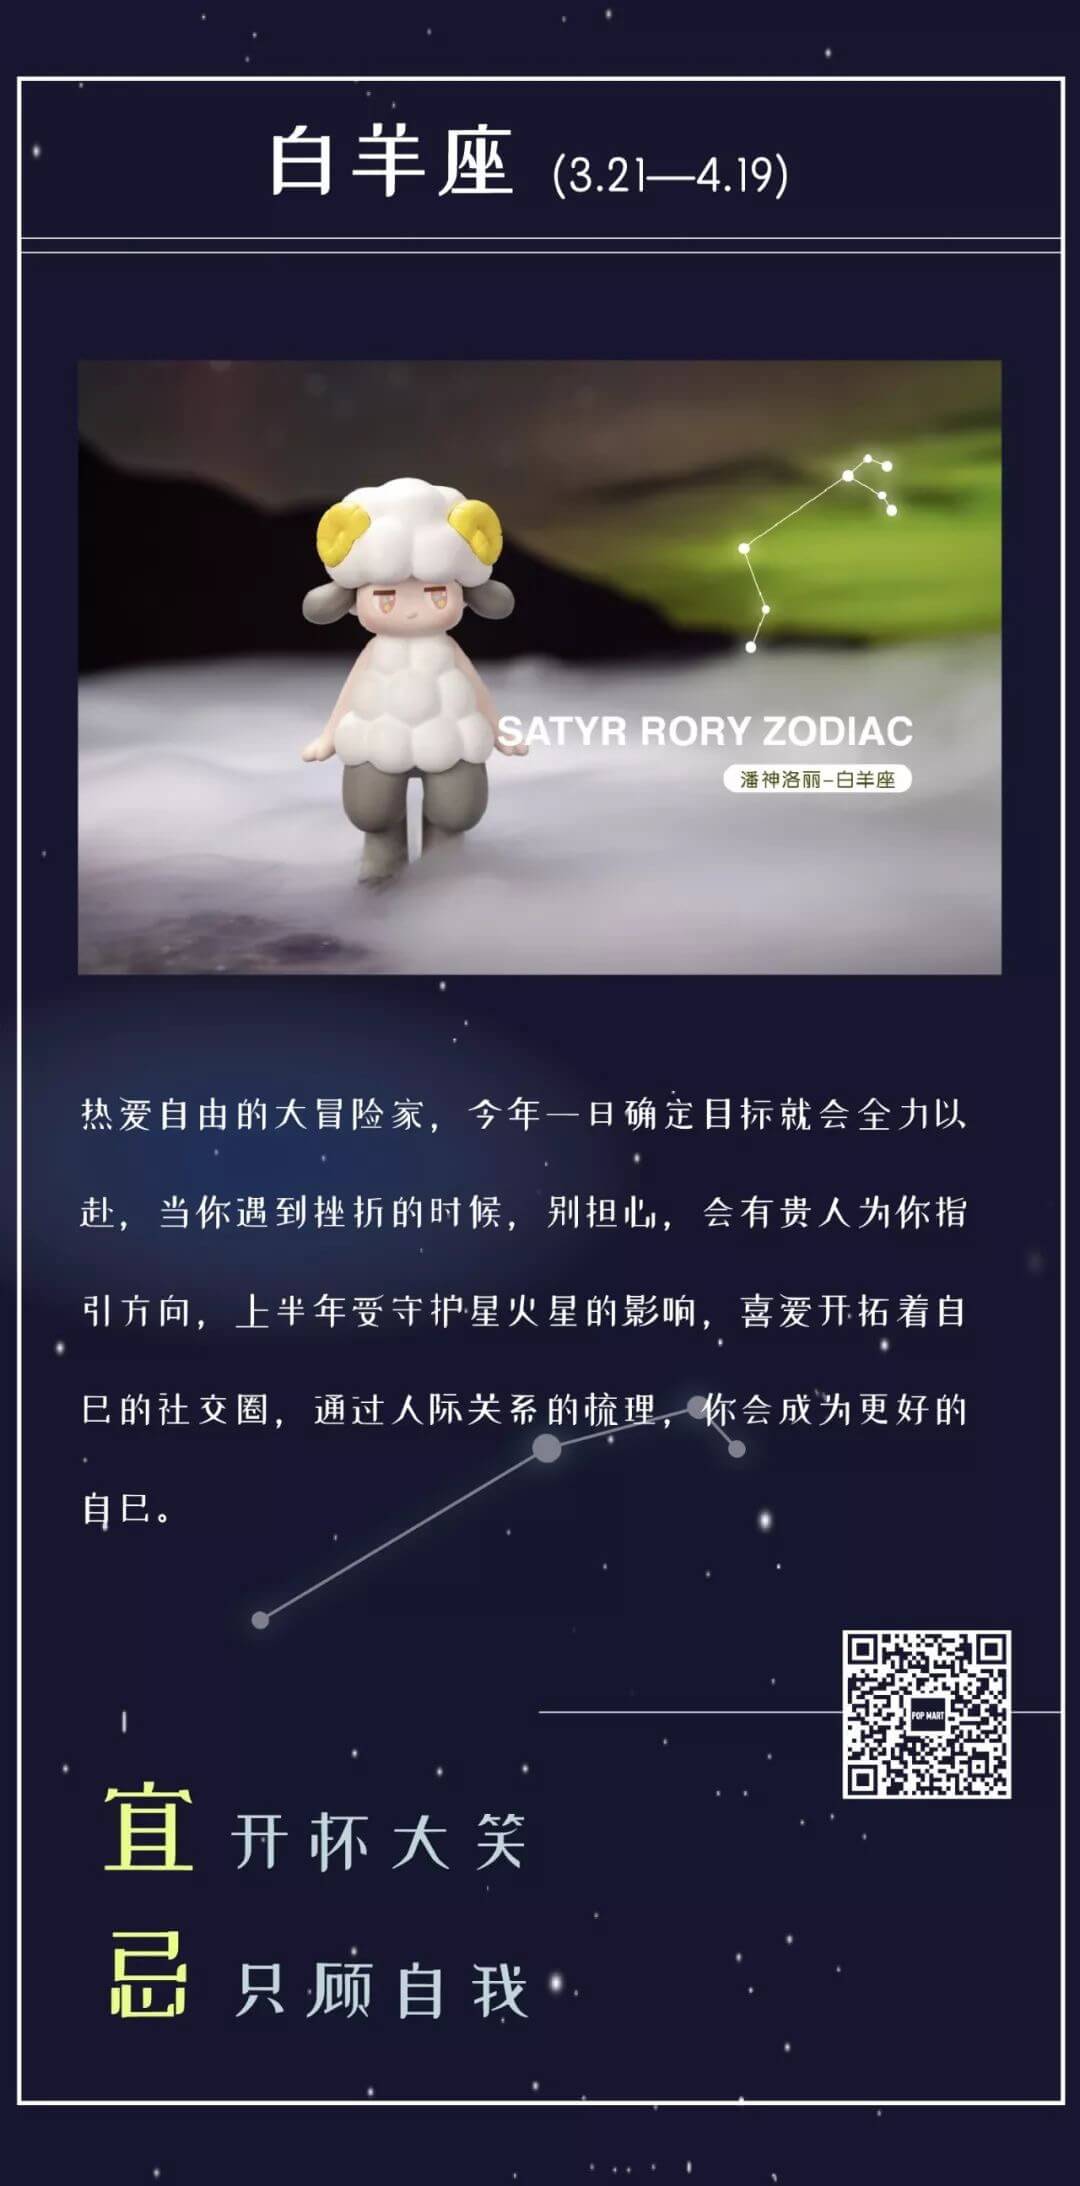 Satyr-Rory-Zodic-Edition-Mini-Series-by-Seulgie-Lee-x-POP-MART-the-toy-chronicle-JPG